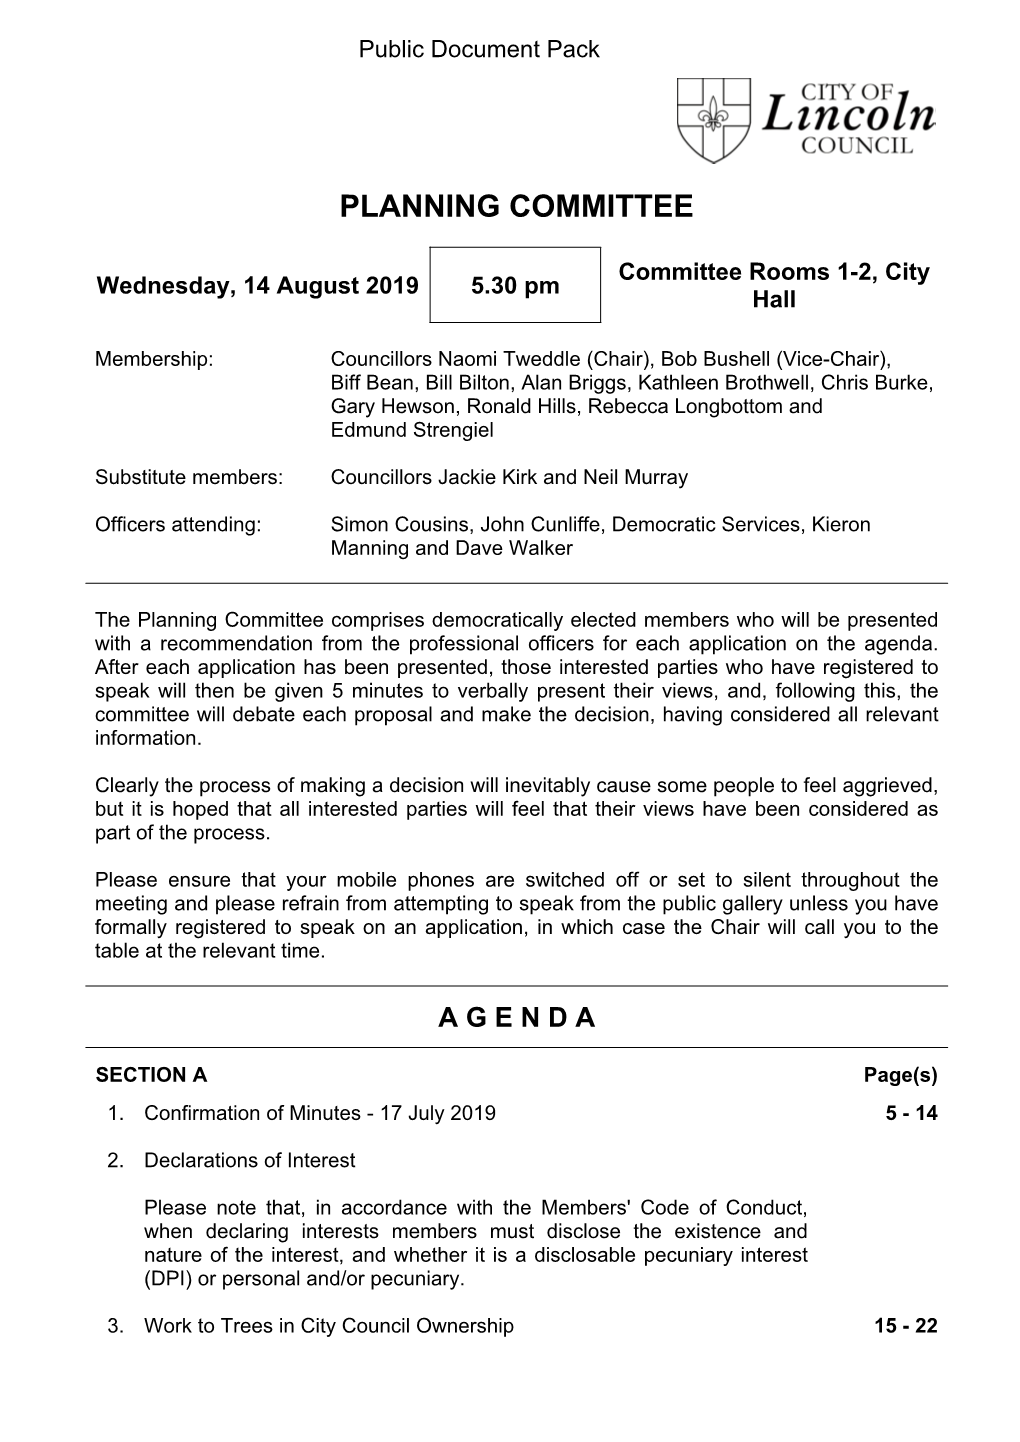 (Public Pack)Agenda Document for Planning Committee, 14/08/2019